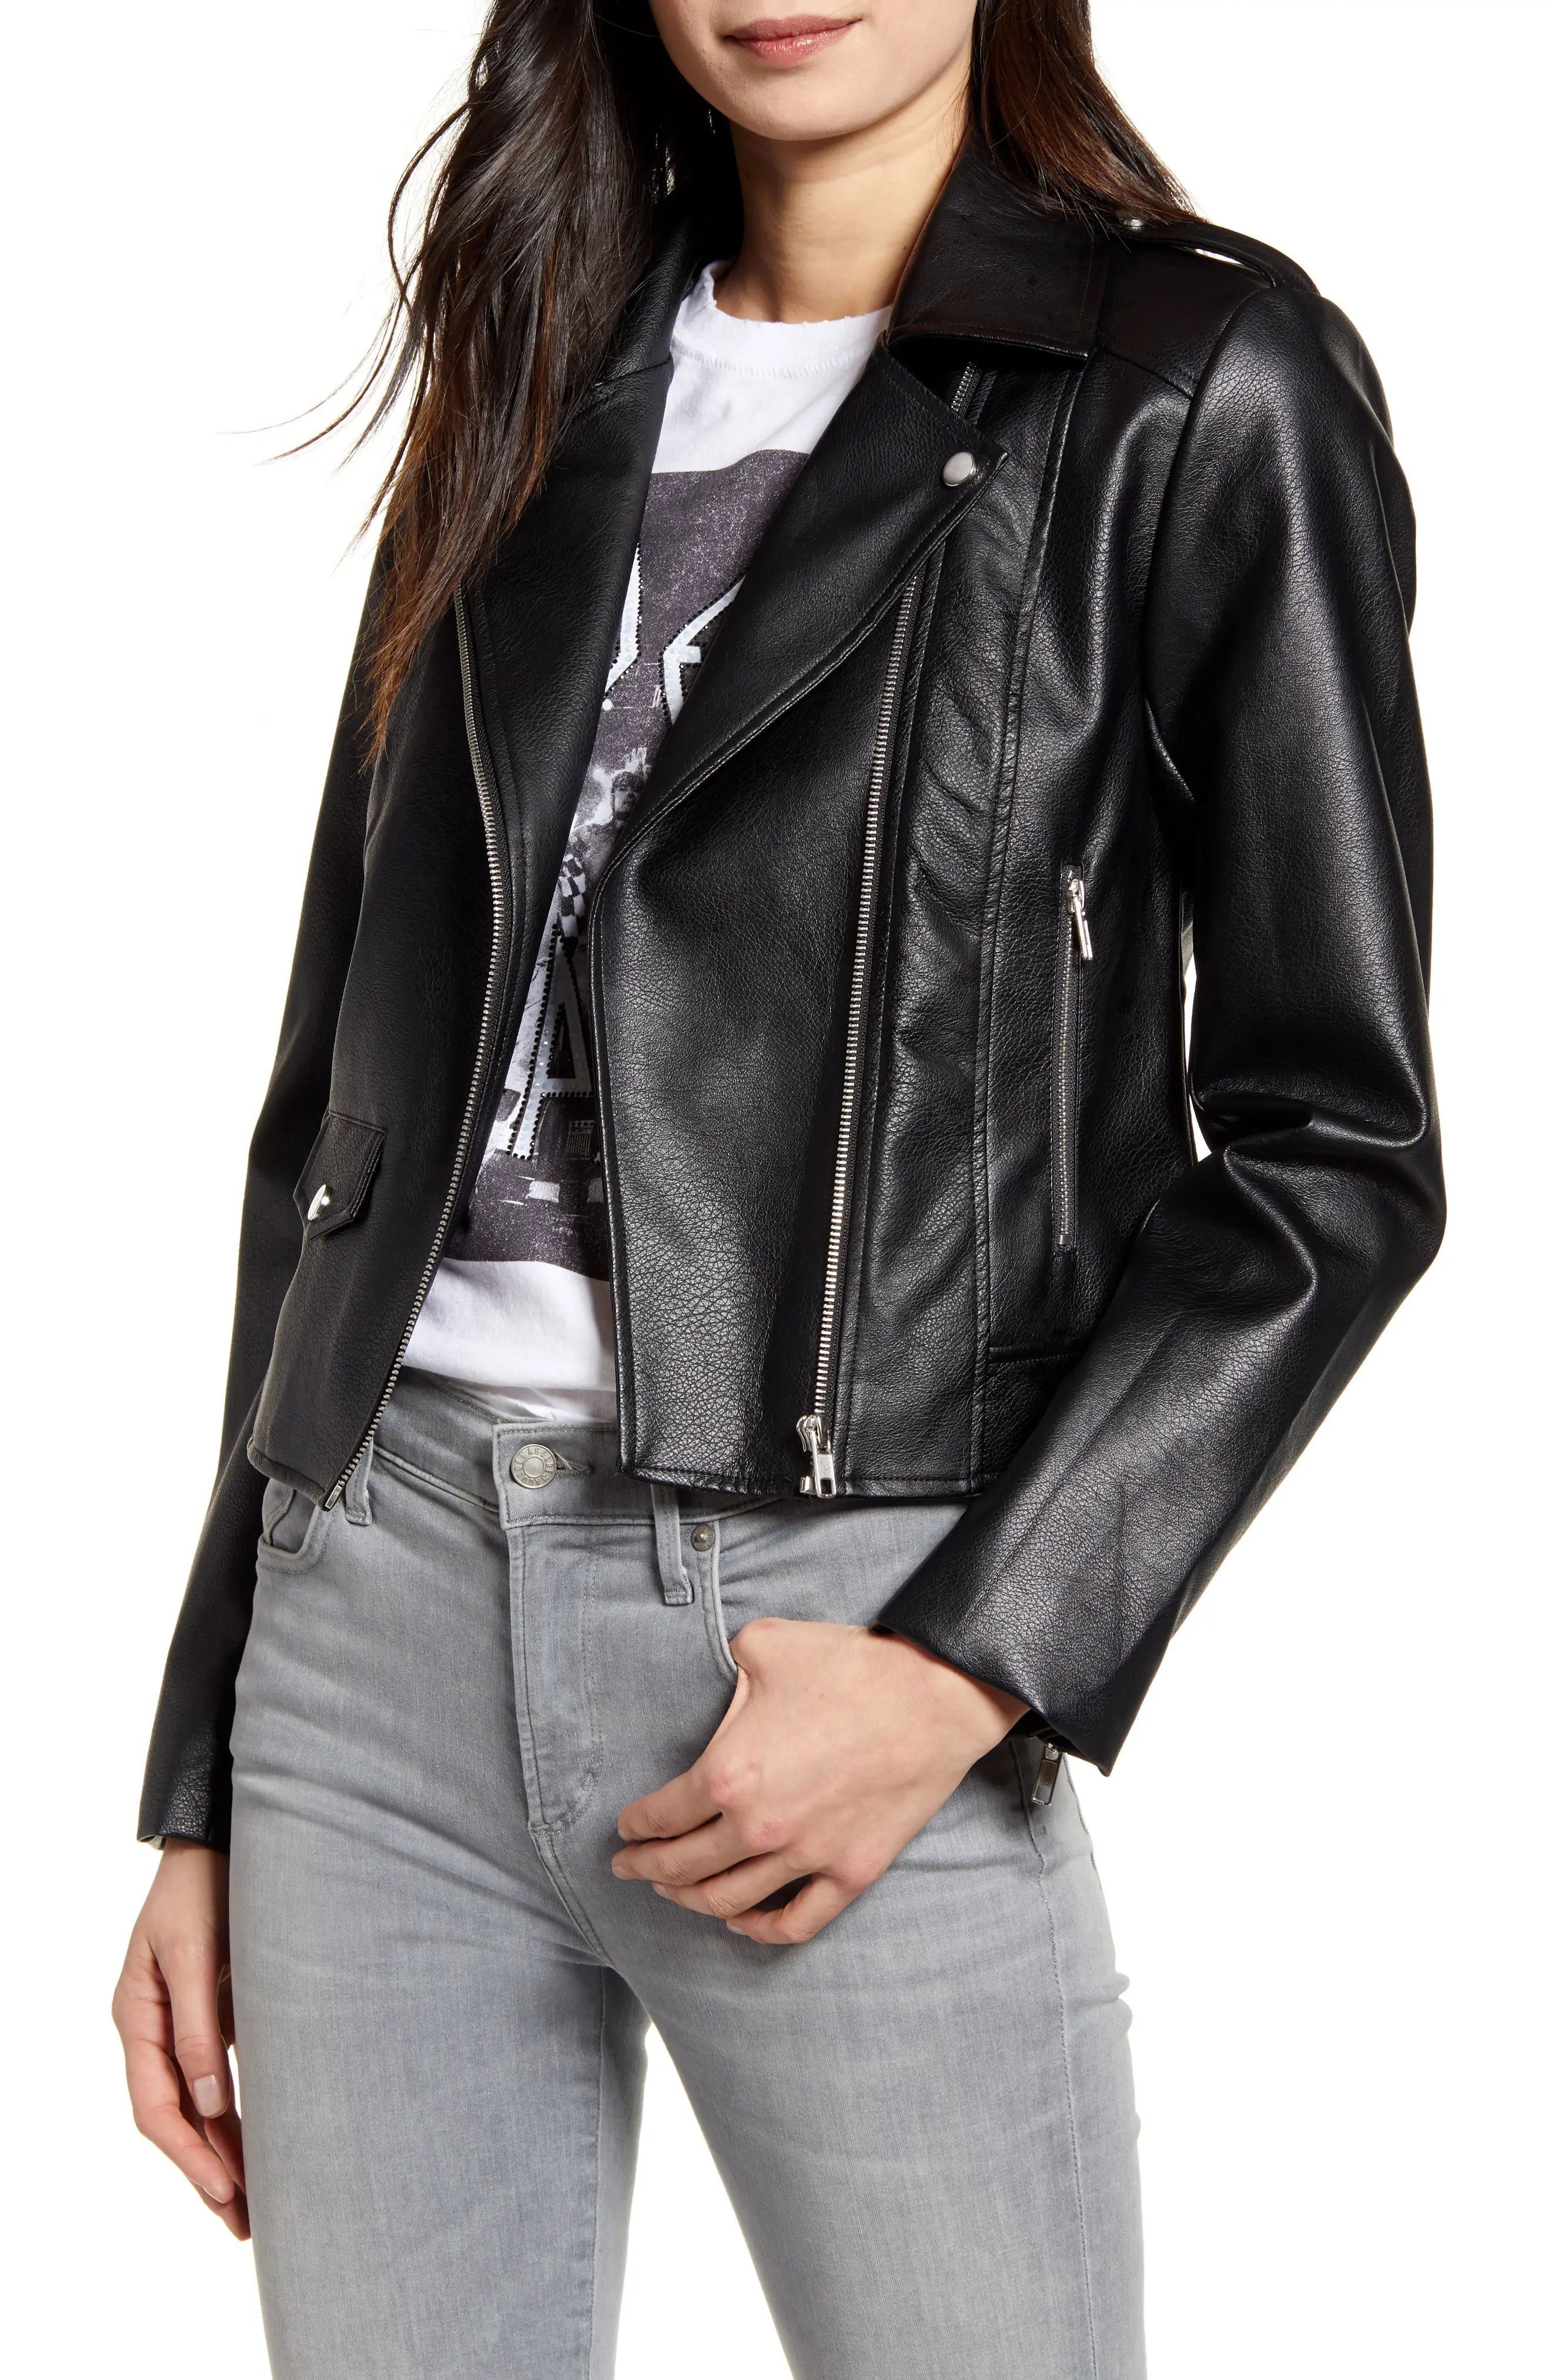 cupcakes and cashmere Roxy Faux Leather Moto Jacket at Nordstrom Rack | Nordstrom Rack